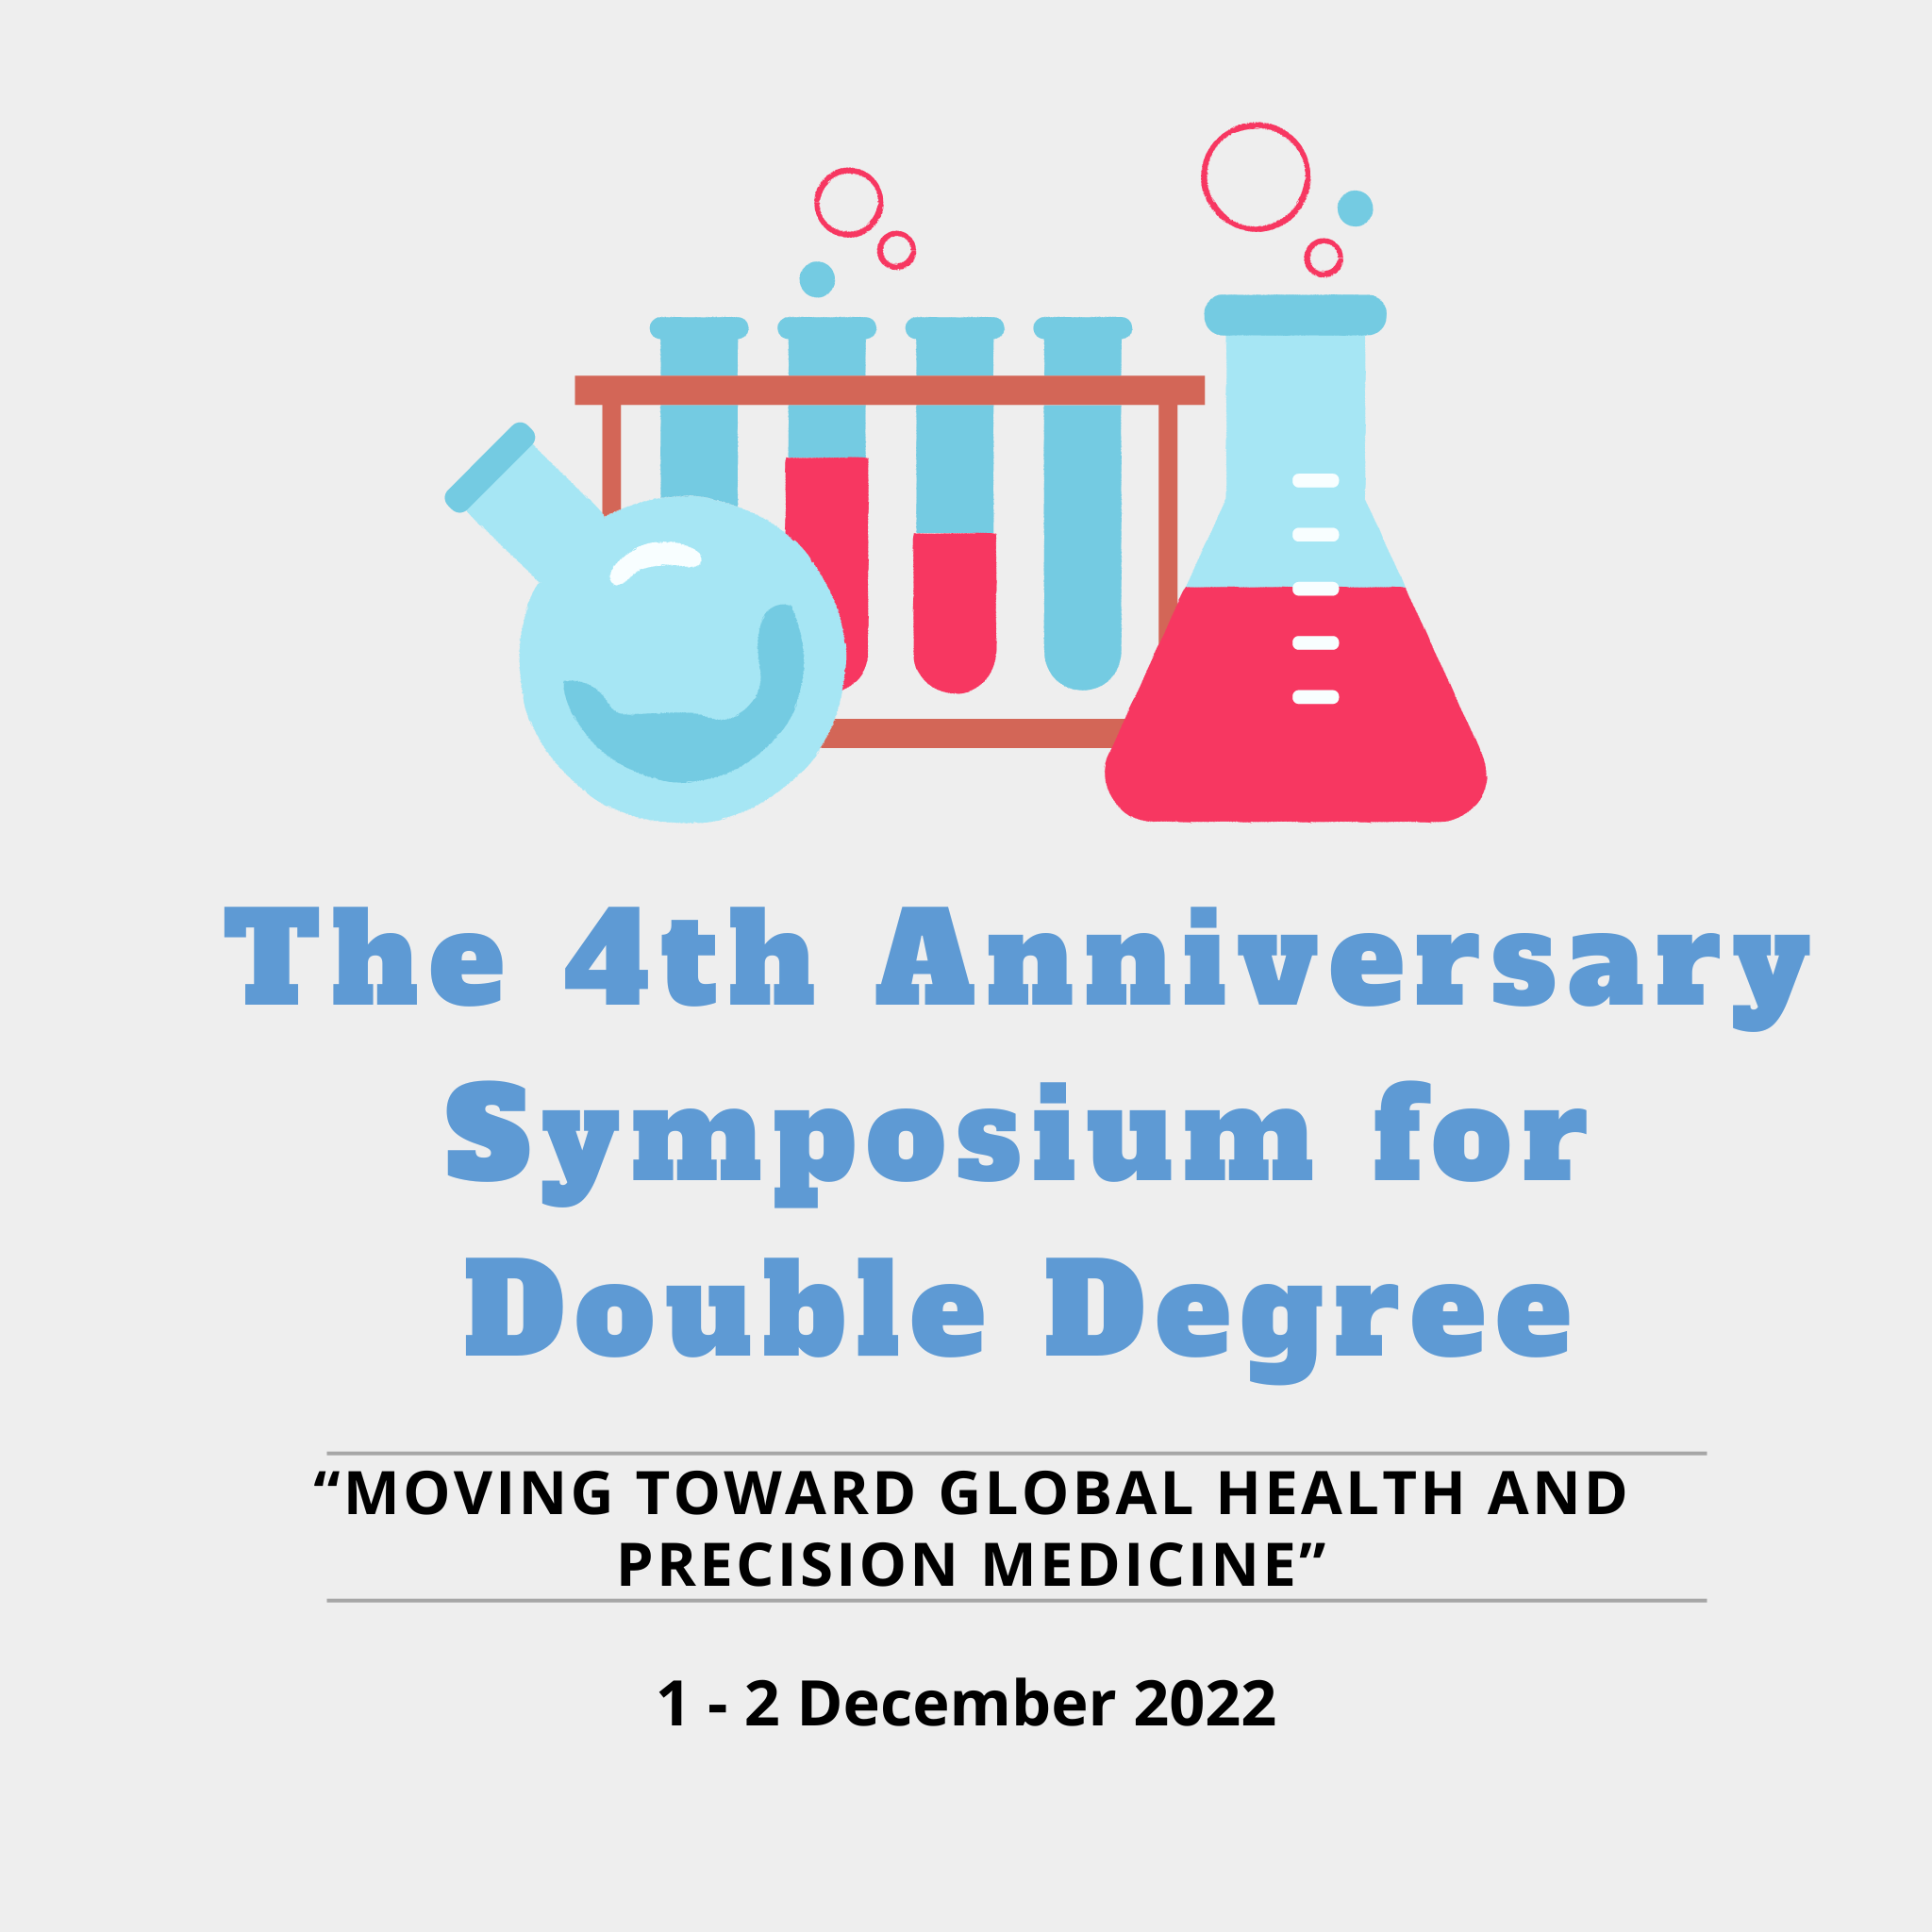 The 4th Anniversary Symposium for Double Degree “Moving toward global health and precision medicine”